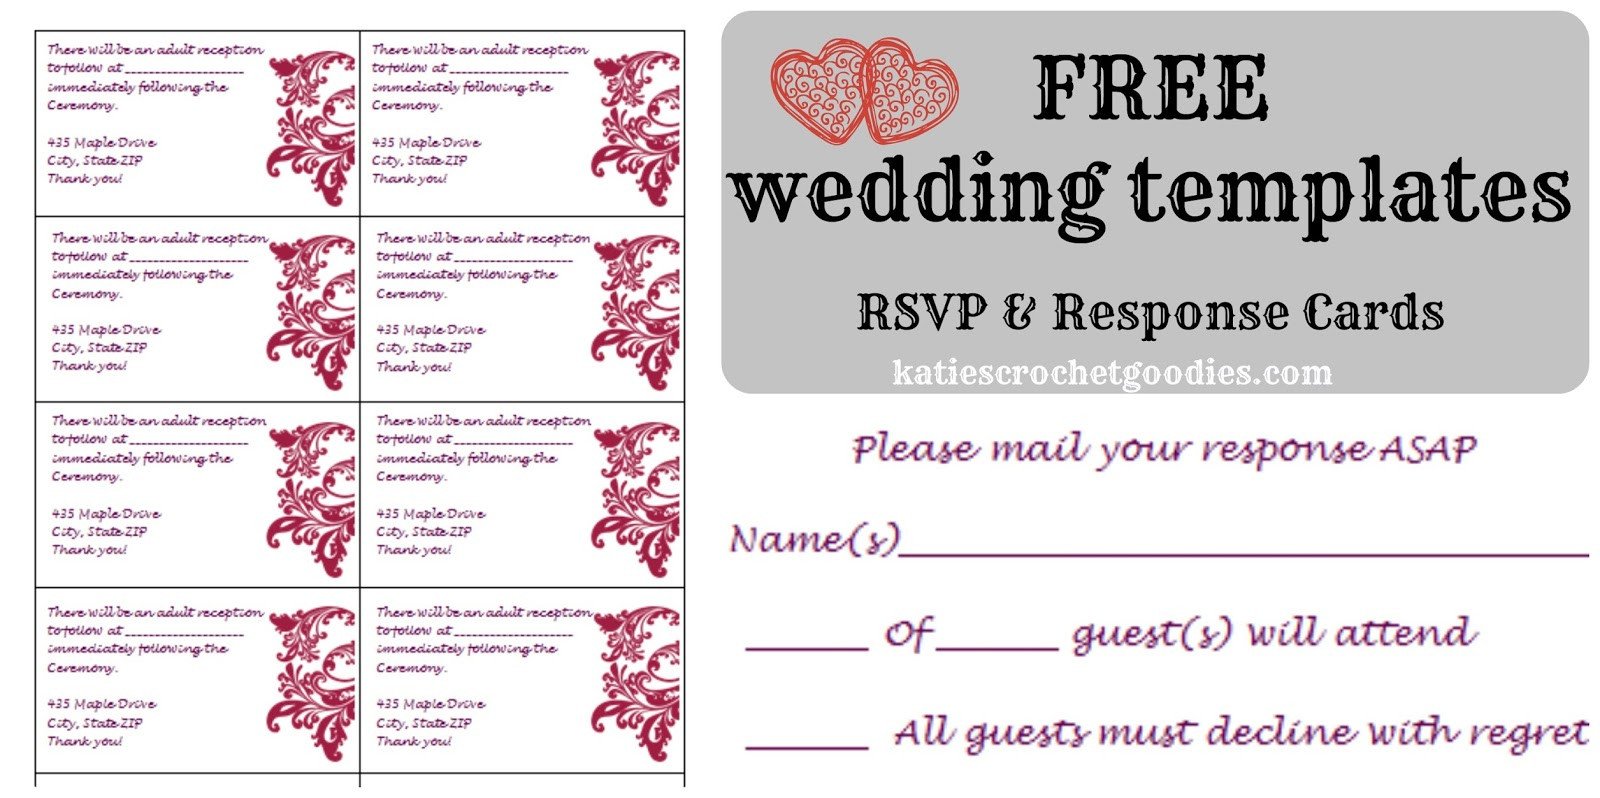 Wedding Card Template Free Download Free Wedding Templates Rsvp &amp; Reception Cards Katie S